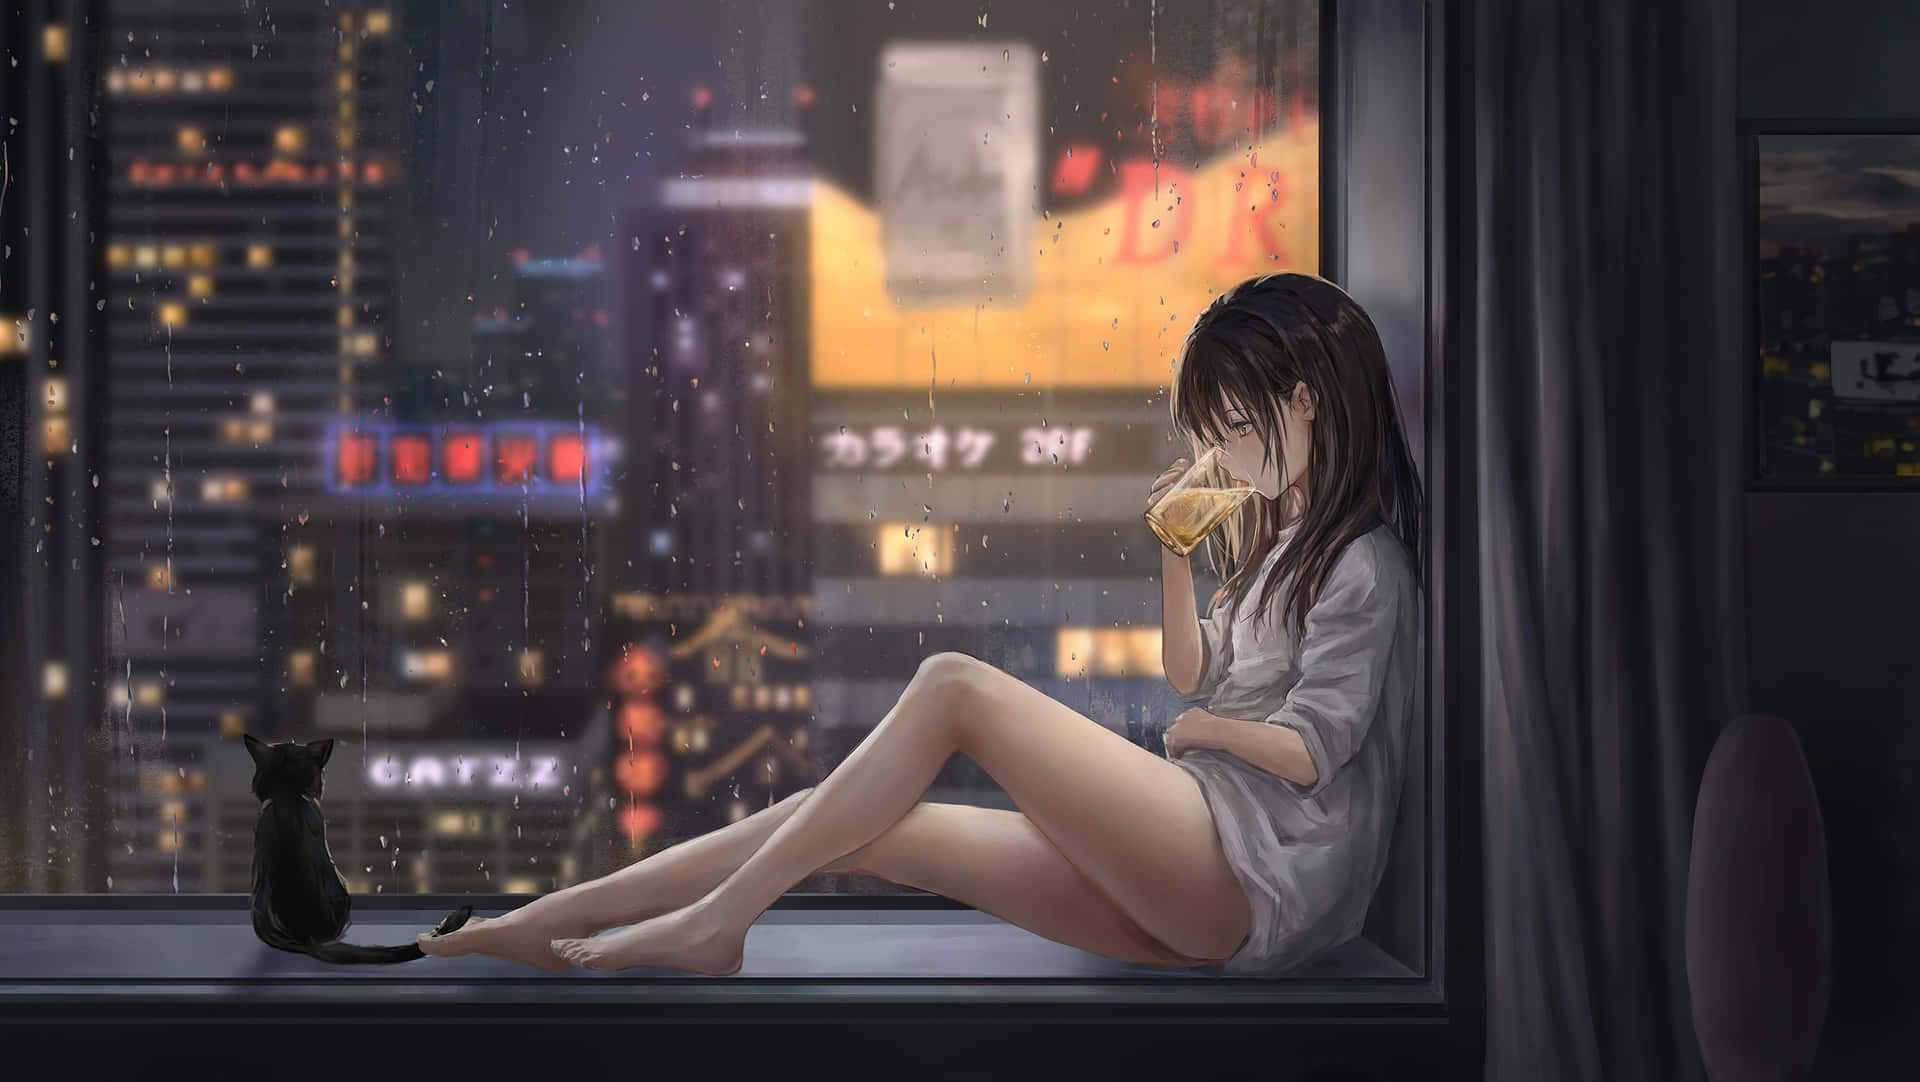 Feel The Rain With This Anime Wallpaper